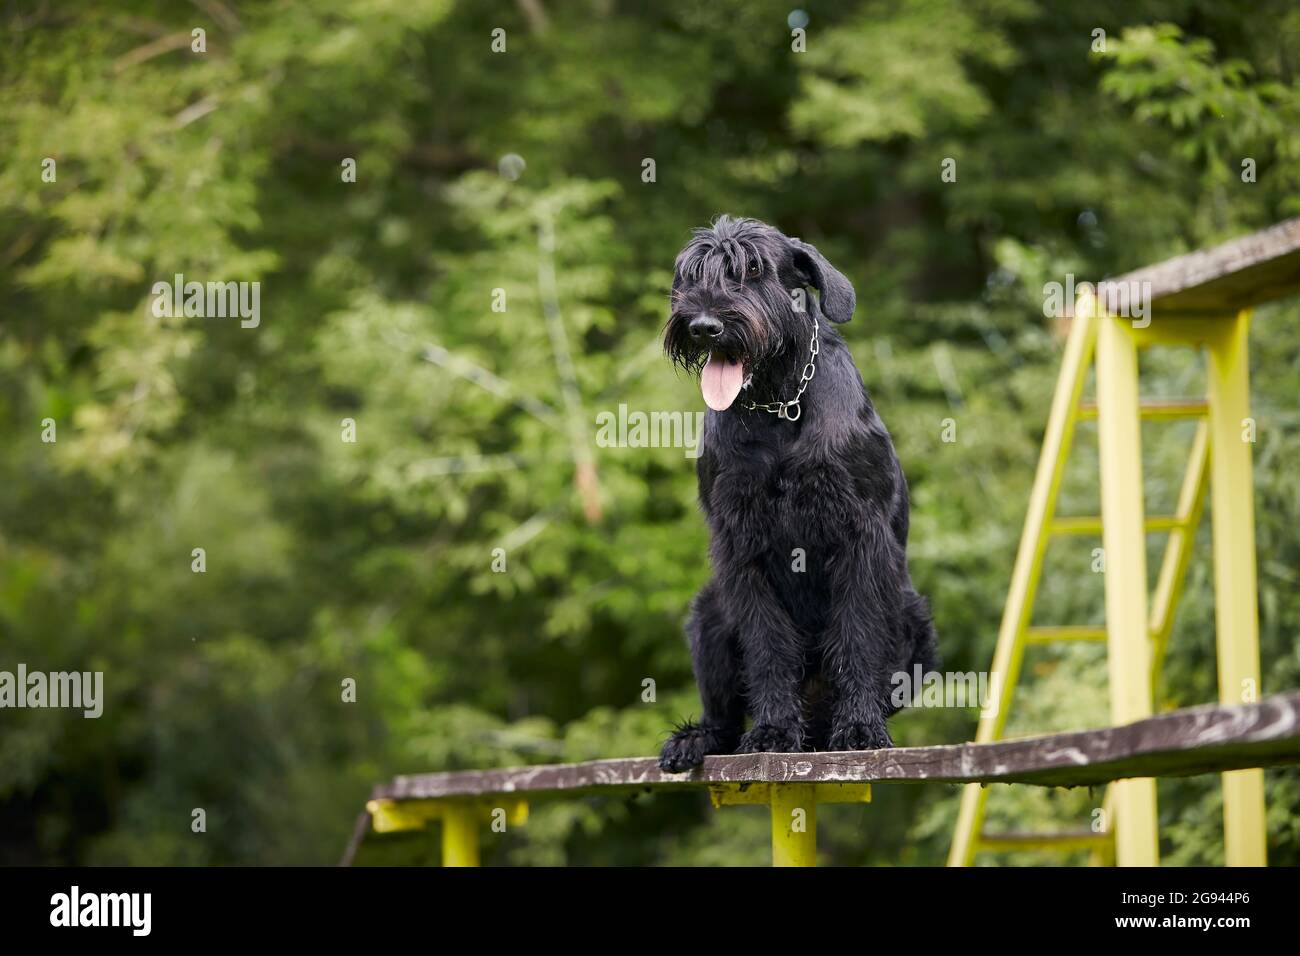 Portrait of dog during obedience training. Giant Schnauzer on obstacle course. Stock Photo